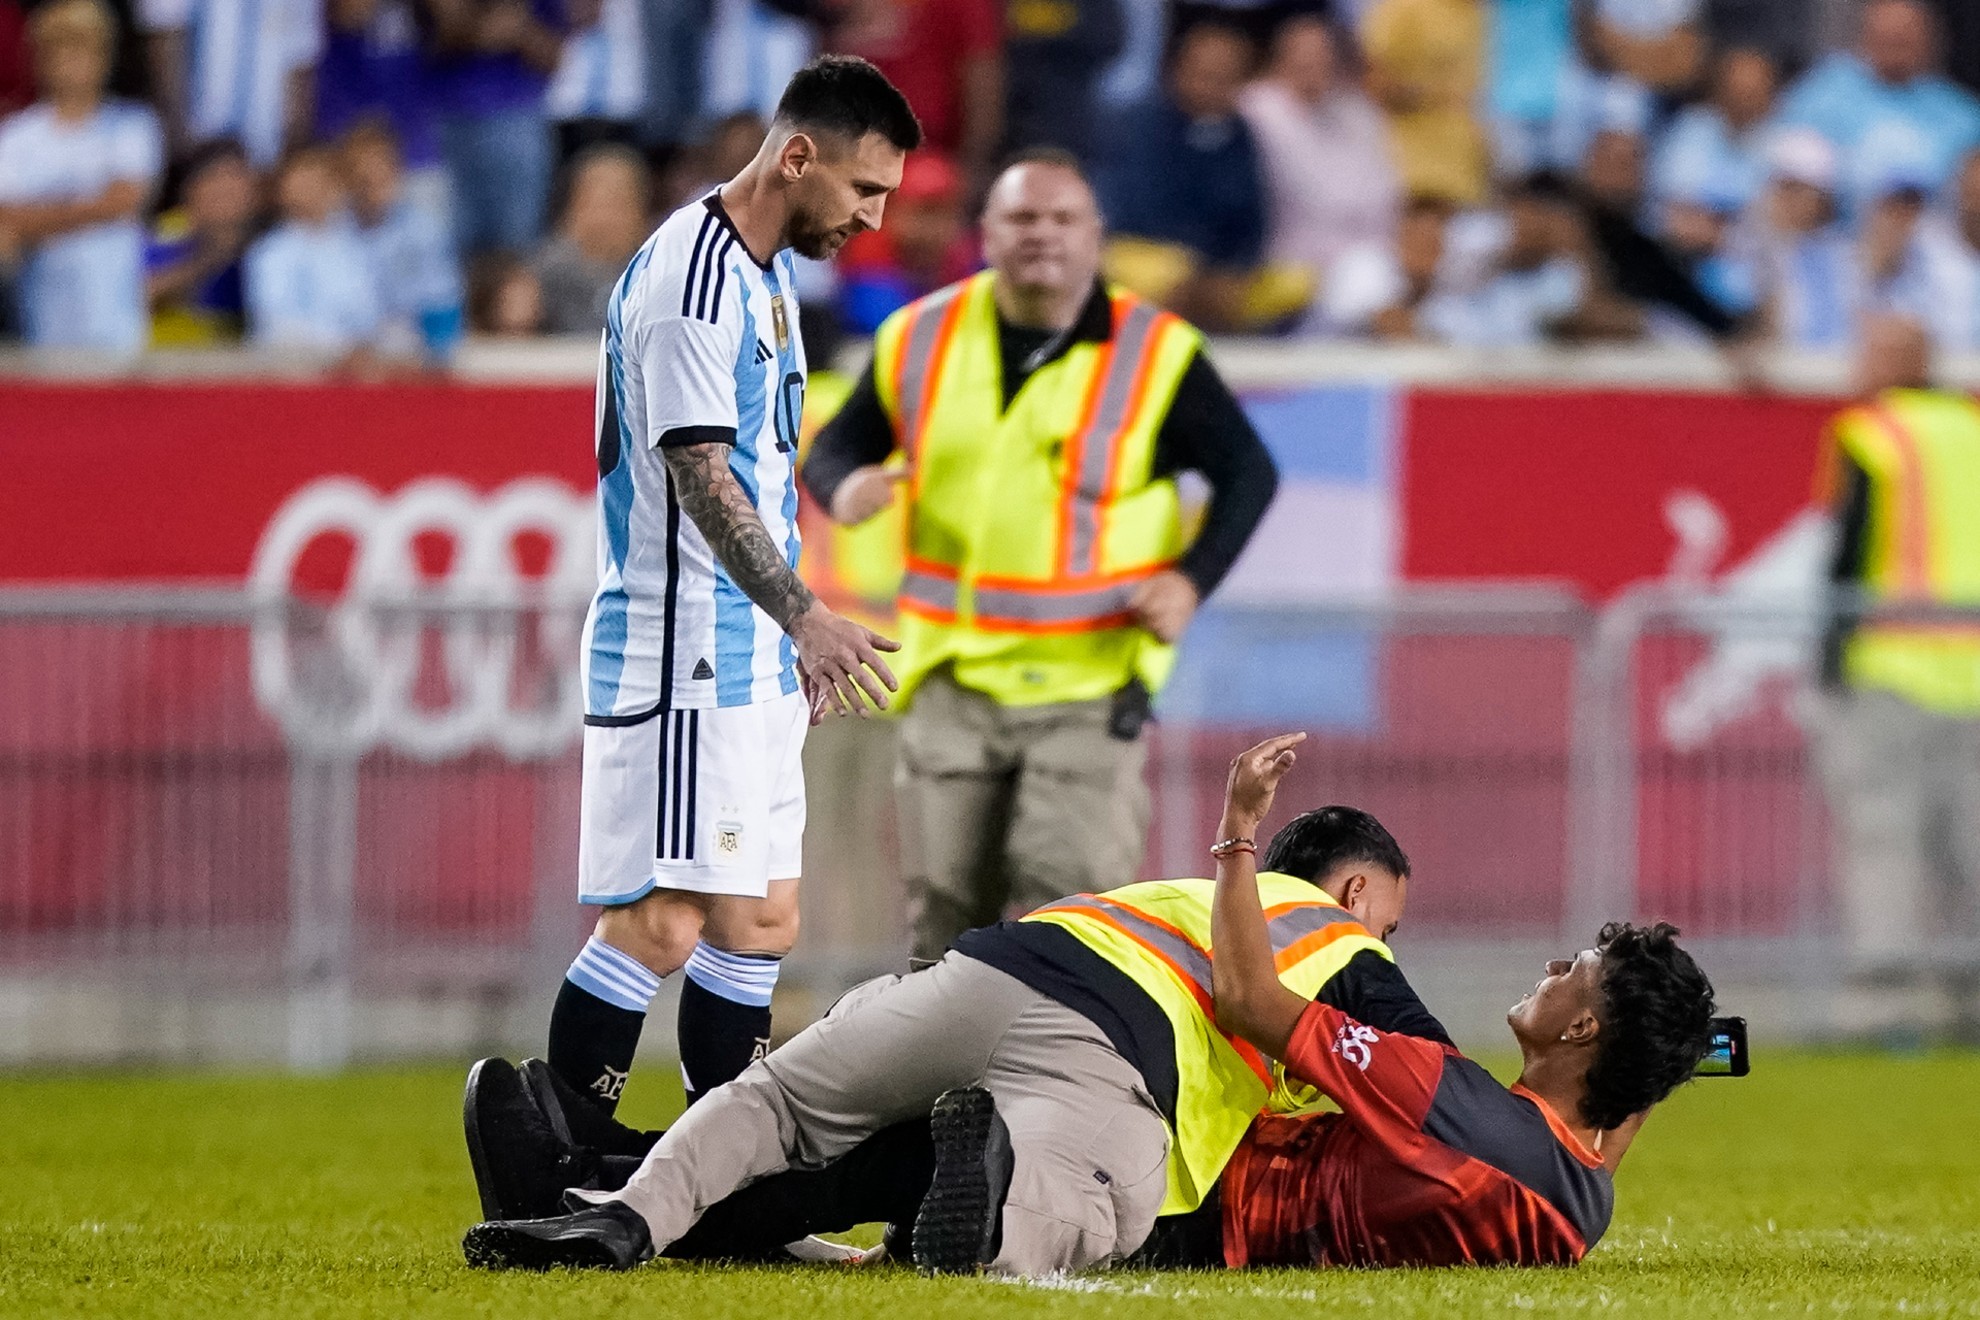 A fan is tackled as he tries to take a picture of Argentina's player Lionel Messi. / AP